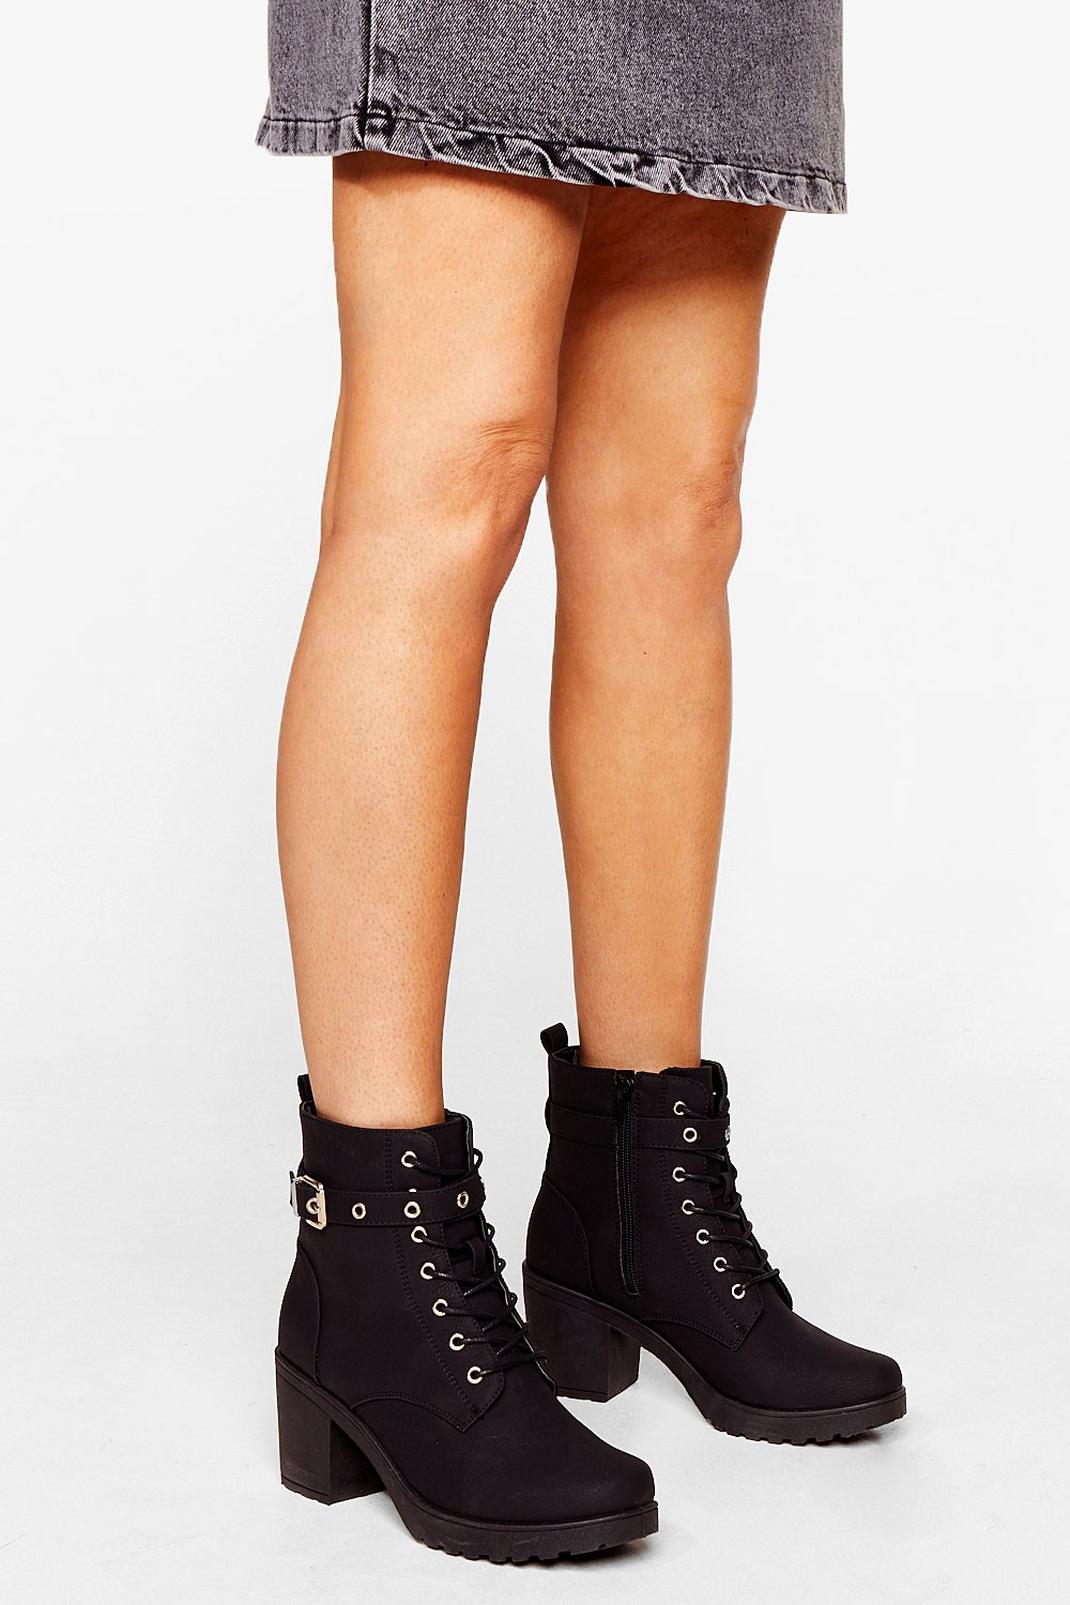 Eyelets Face the Music Faux Suede Heeled Boots image number 1